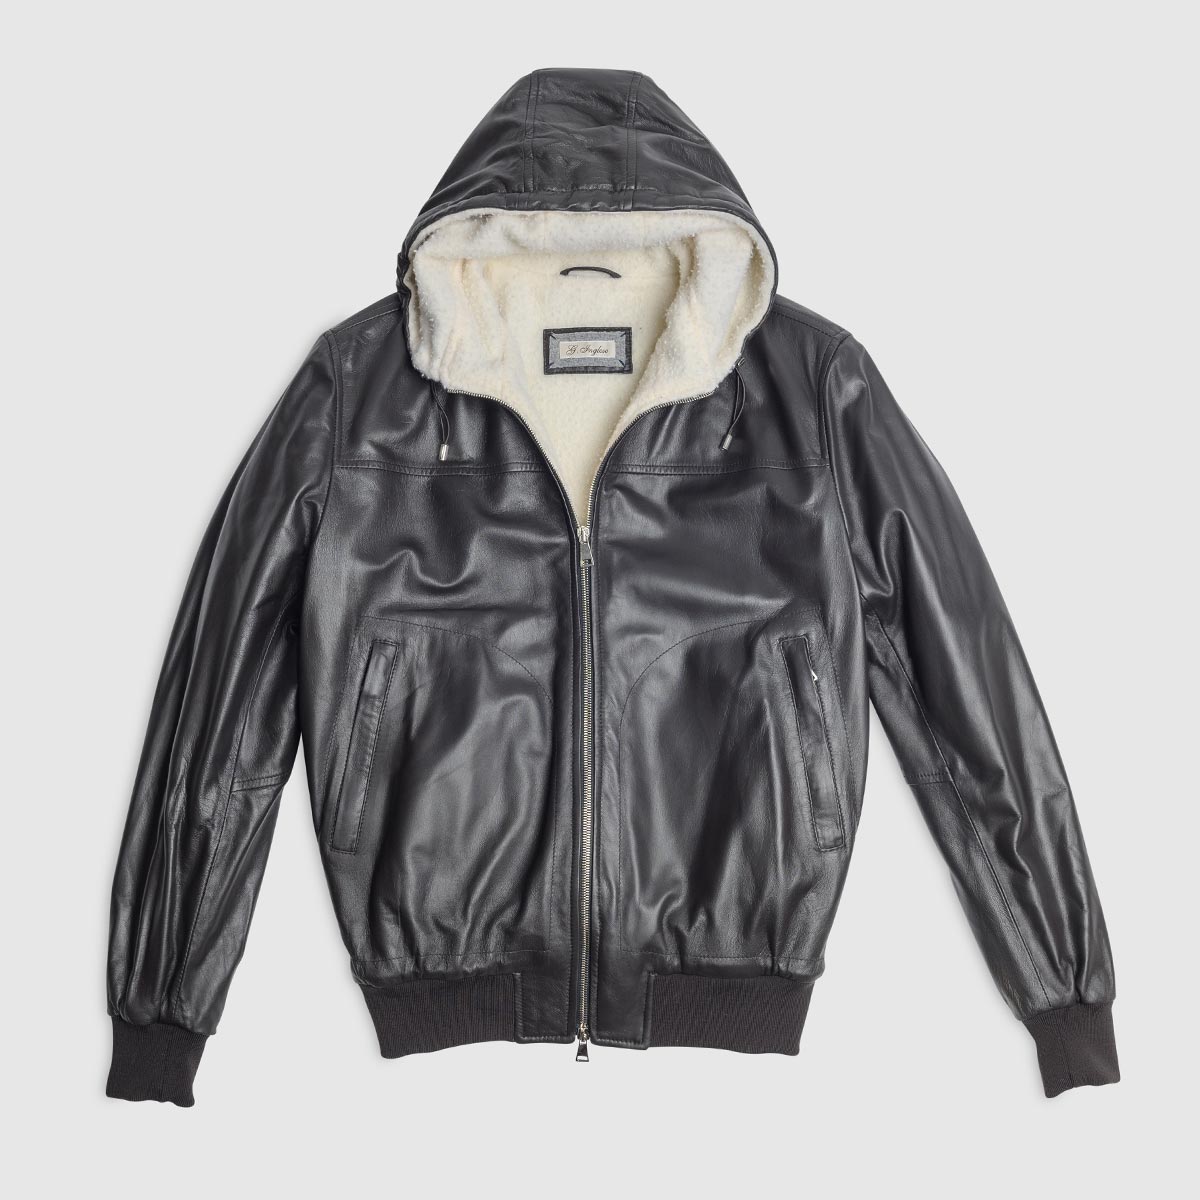 Brown Leather Bomber Jacket With Hood And White Casentino Padding G. Inglese on sale 2022